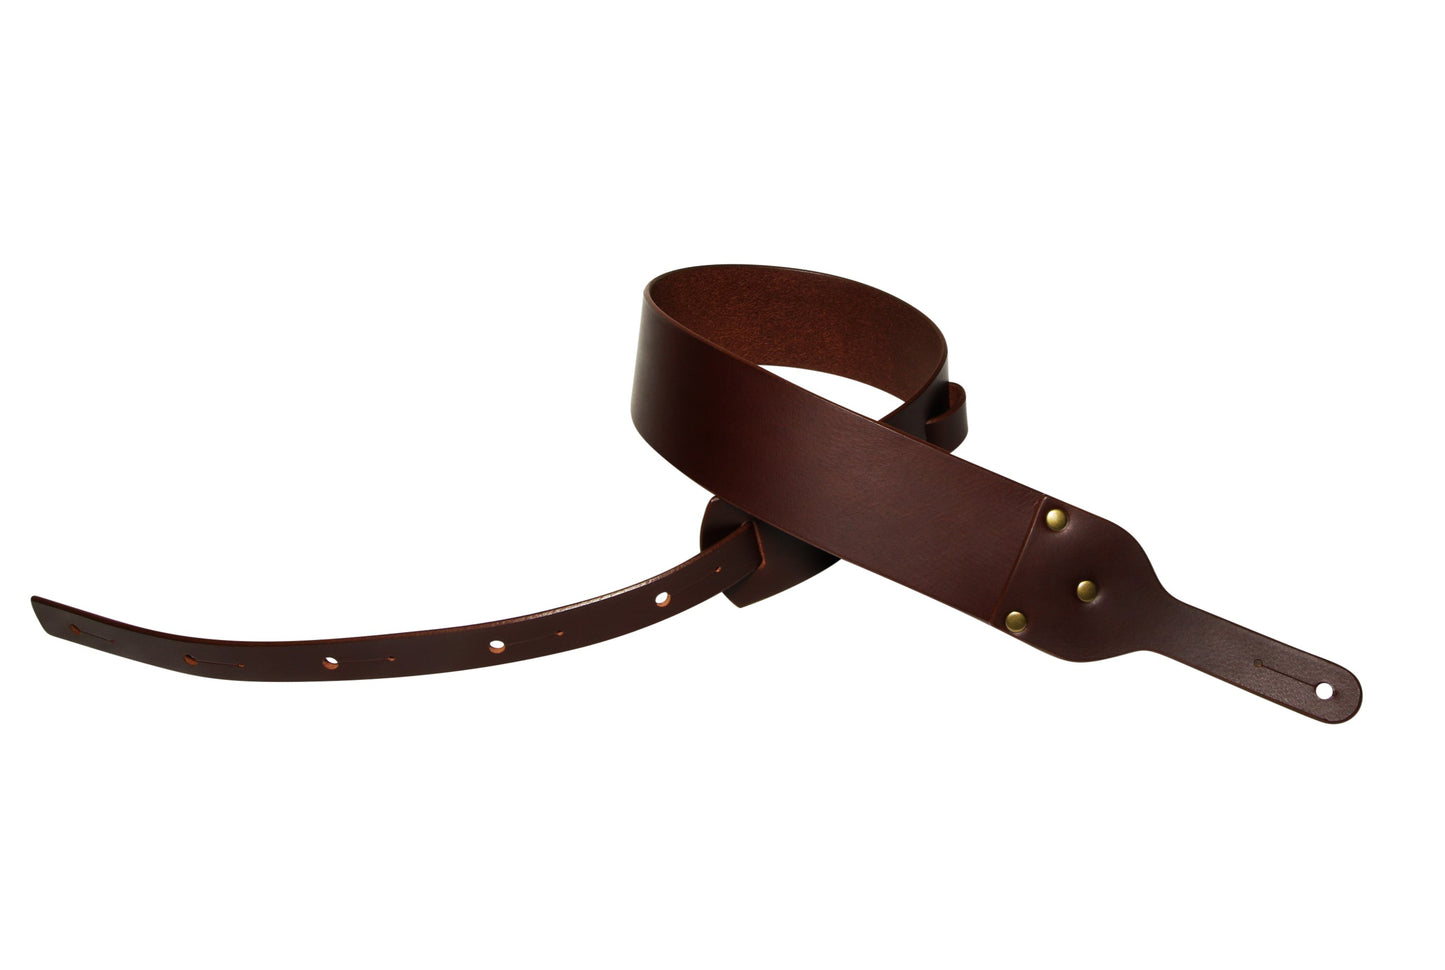 Buffalo Leather Guitar Strap Medium Brown 2.5 Inches Wide